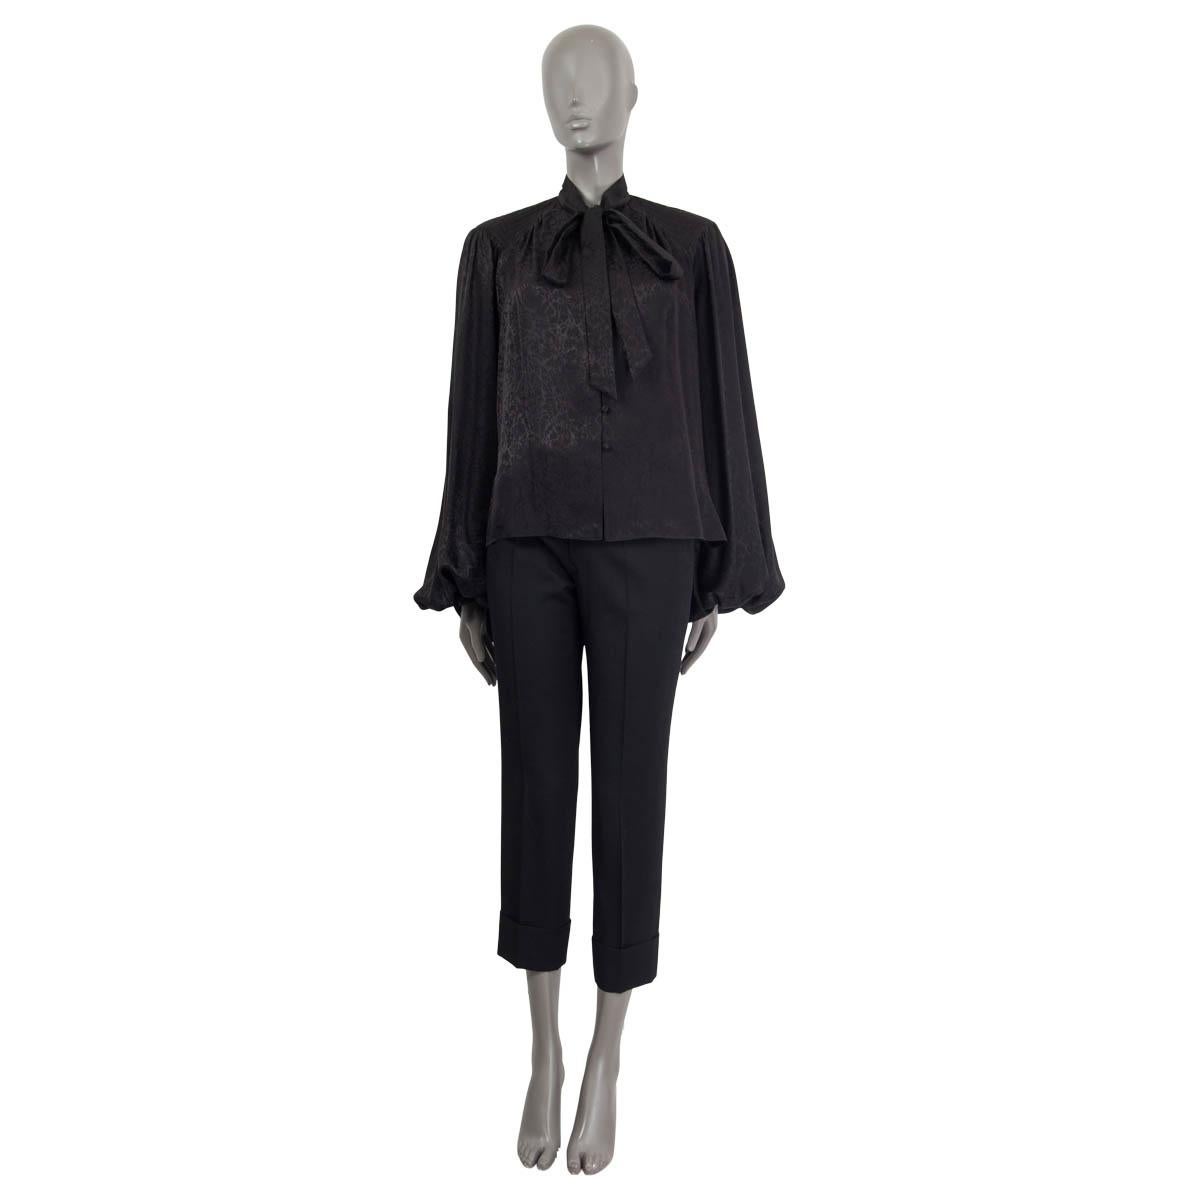 100% authentic Saint Laurent long sleeve pussy bow blouse in black silk (100%). Fall/winter 2018. Embellished with quilted parts on the shoulders, wide sleeves and buttoned cuffs. Opens with eight black buttons. Lined in silk (100%). Has been worn